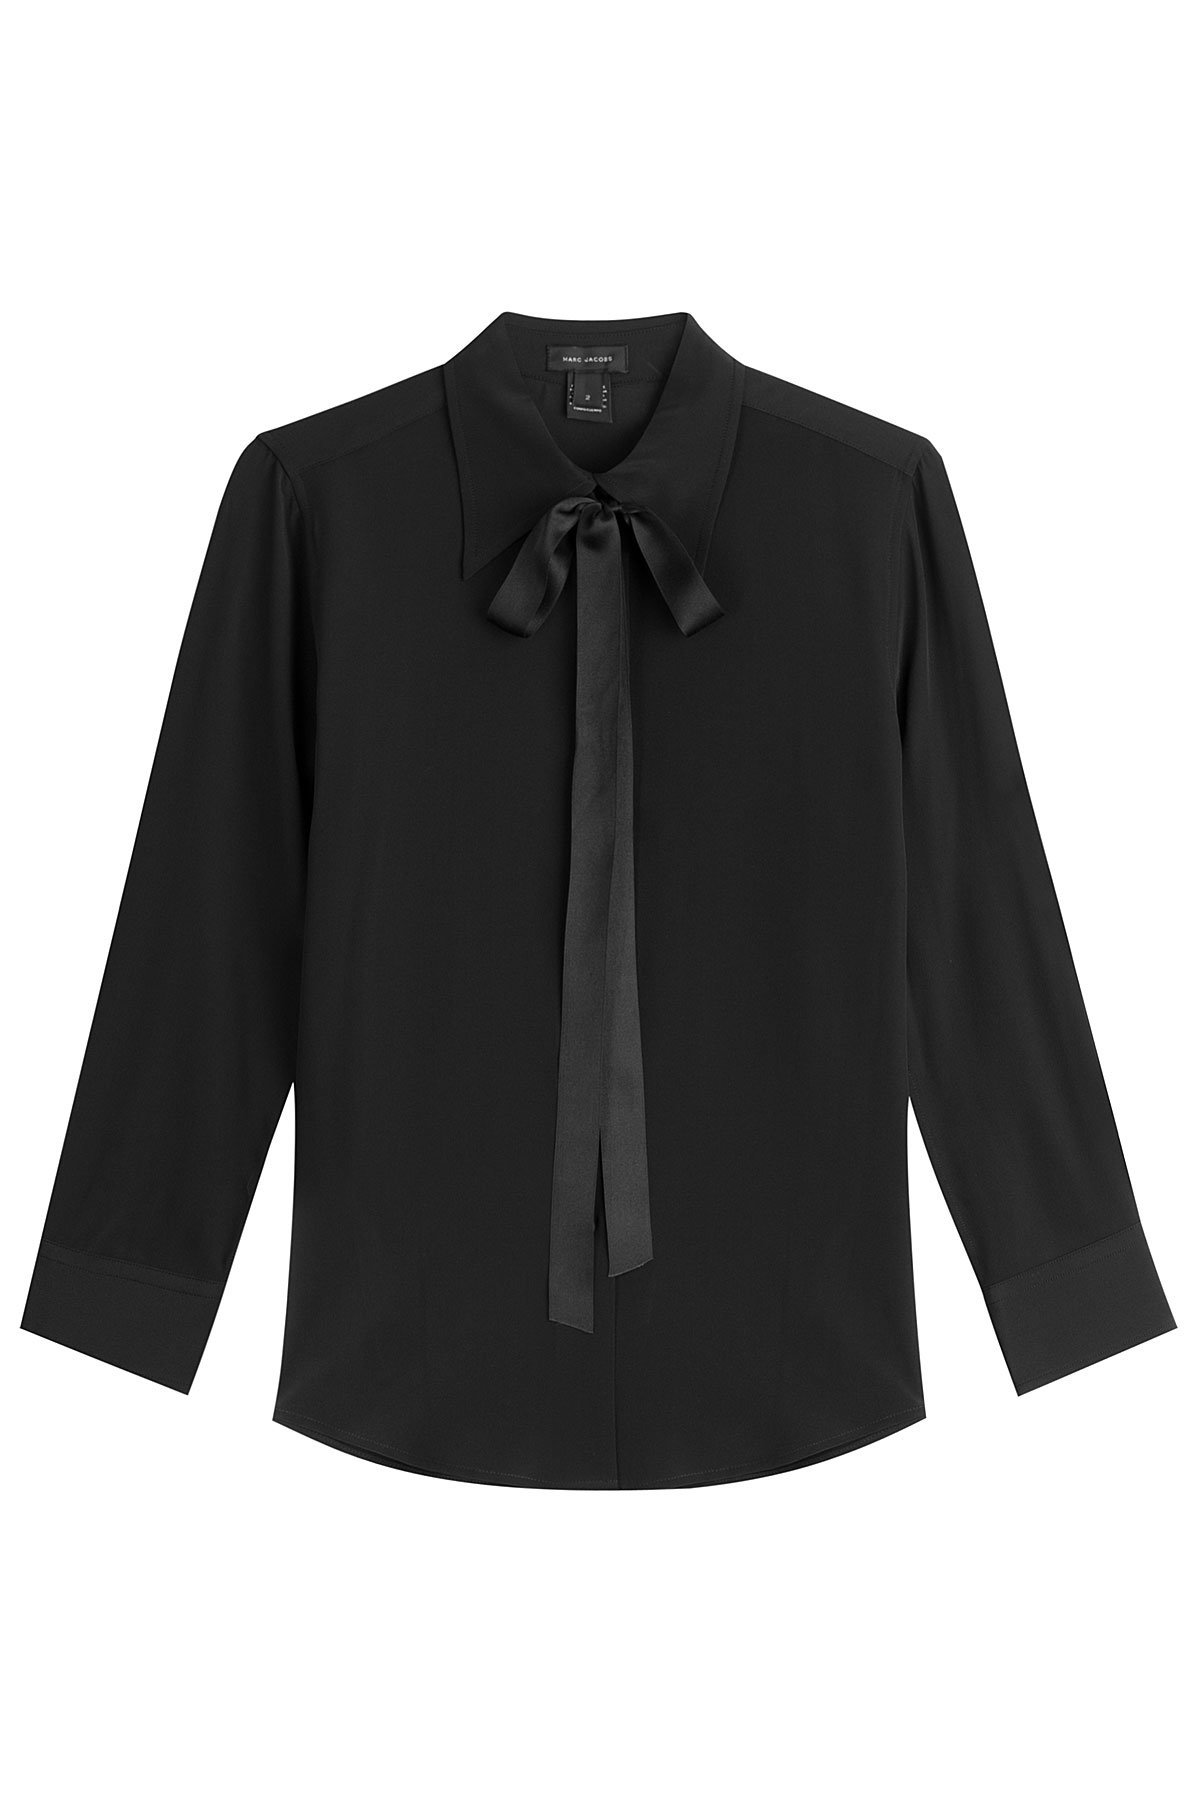 Marc Jacobs - Silk Blouse with Ribbon Tie